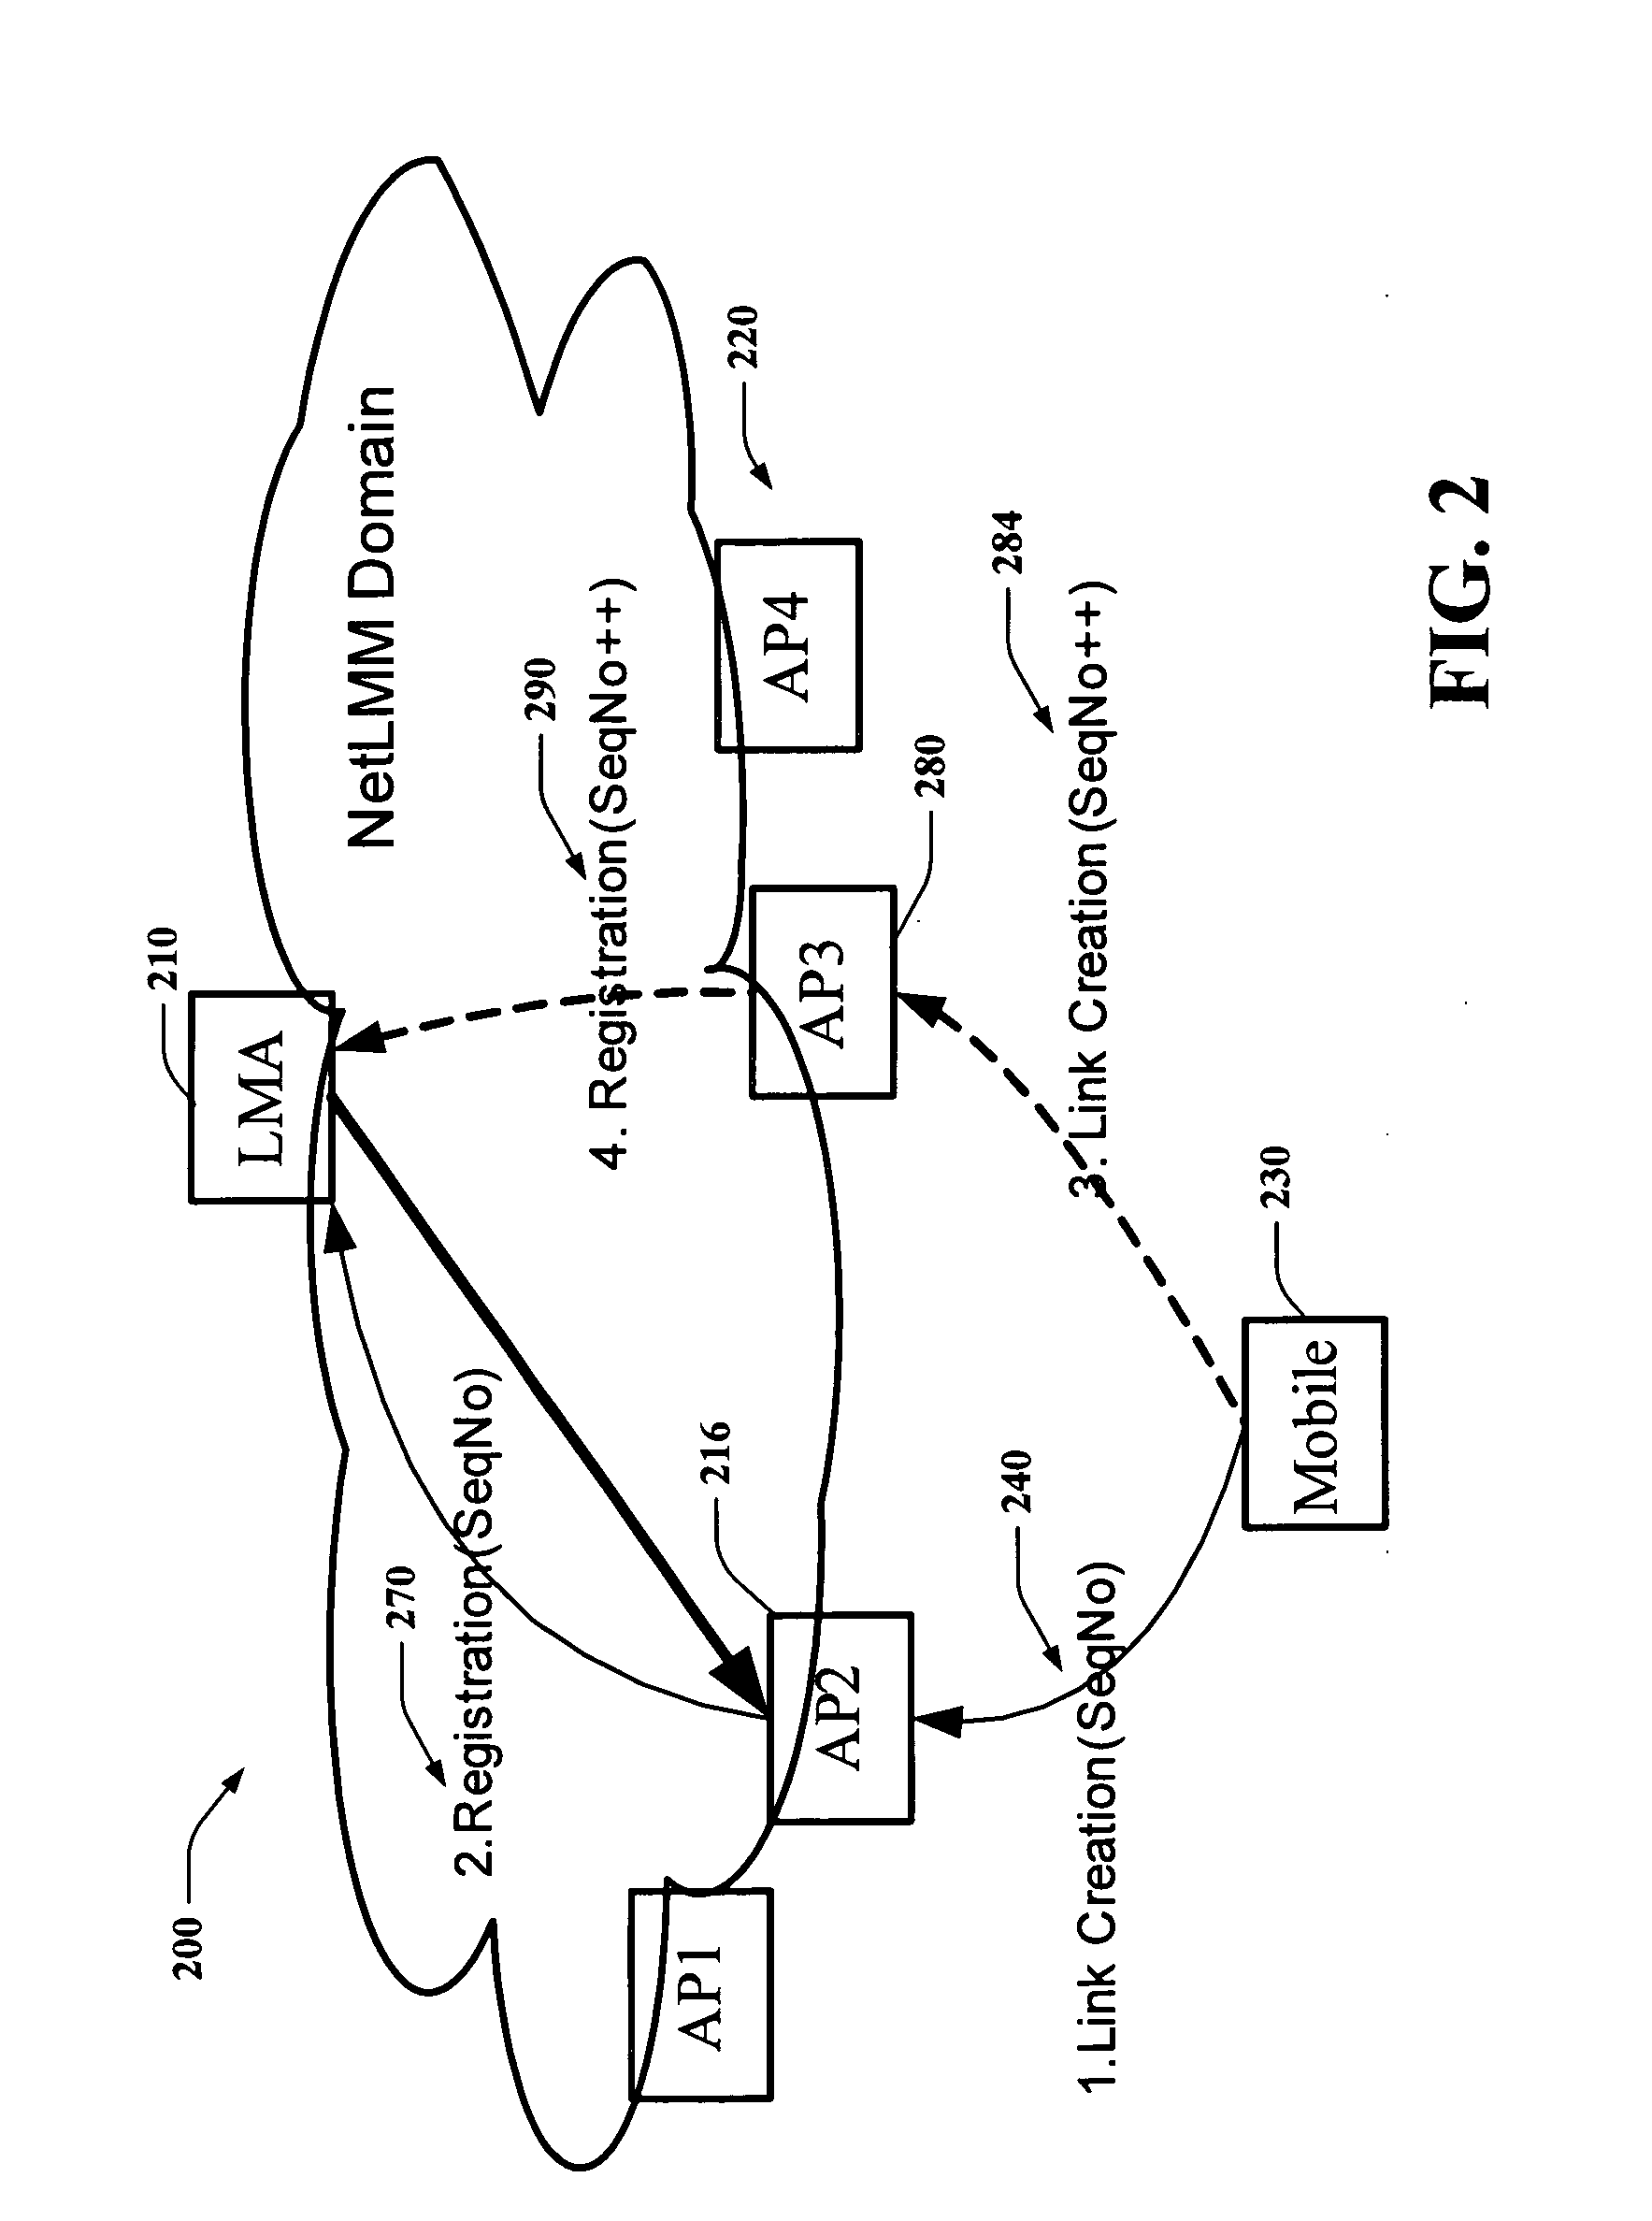 Message ordering for network based mobility management systems